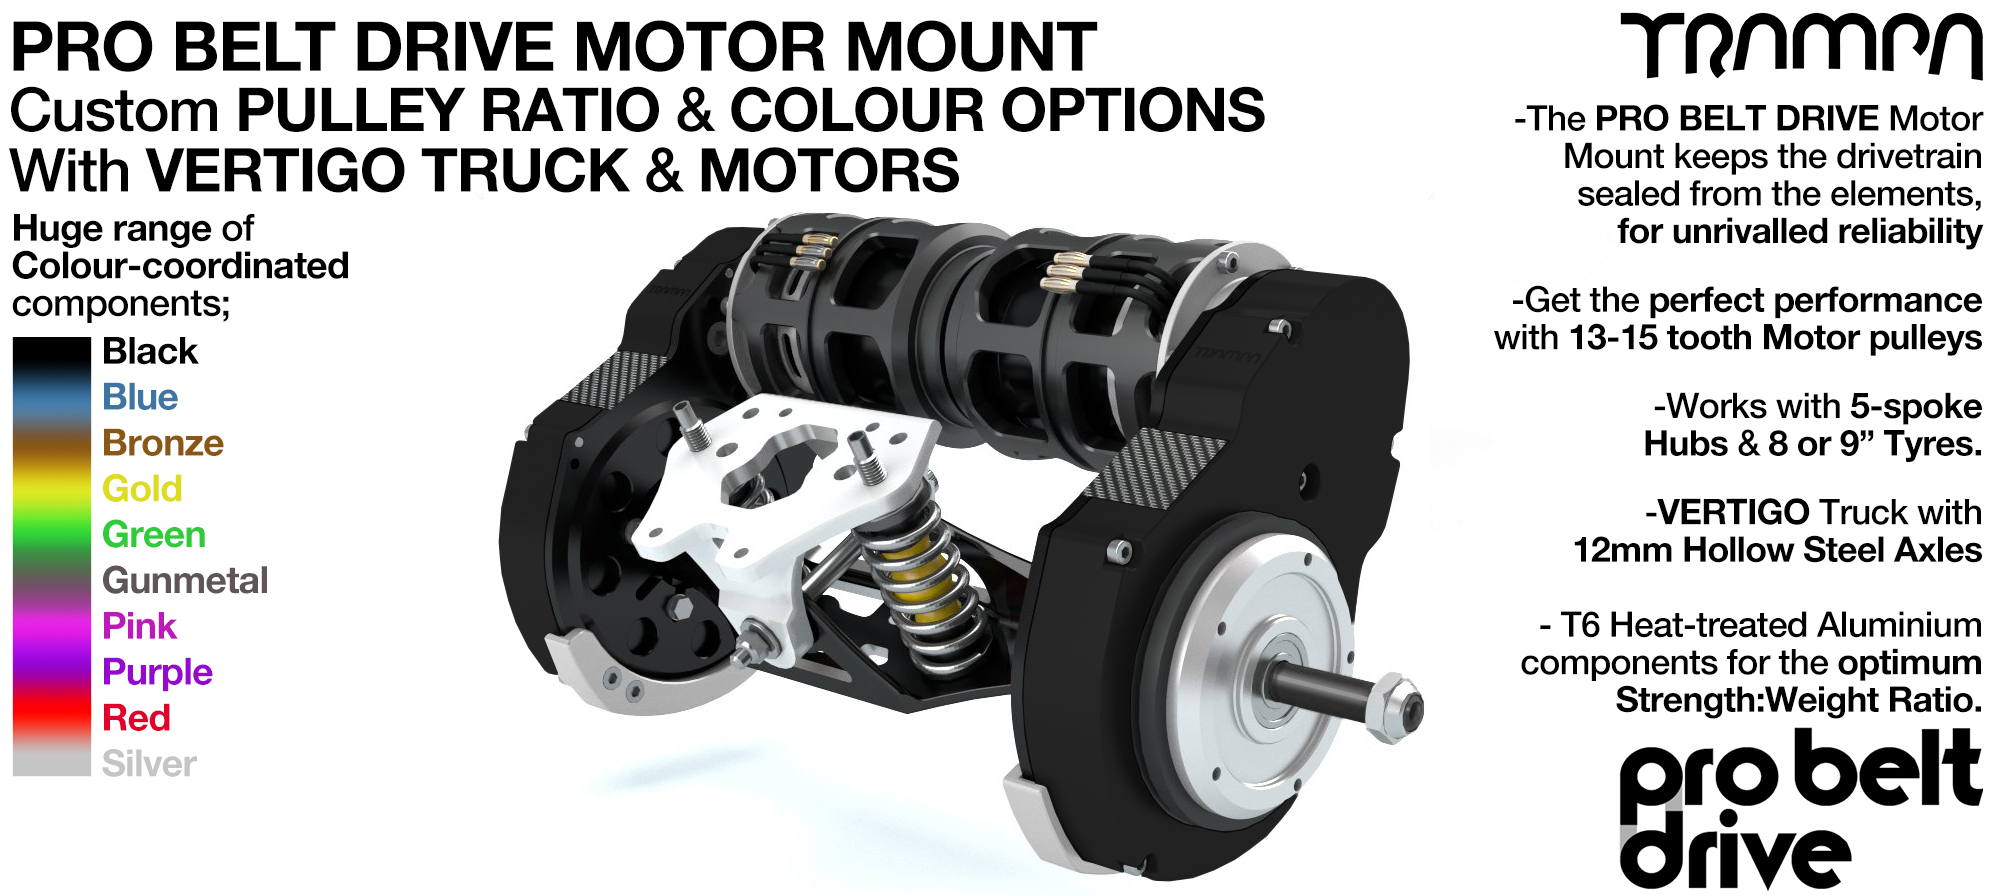 16mm PRO BELT DRIVE LOADED Motor Mounts MOTORS, PULLEYS & Motor PROTECTION FILTERS mounted on a CNC TRUCK